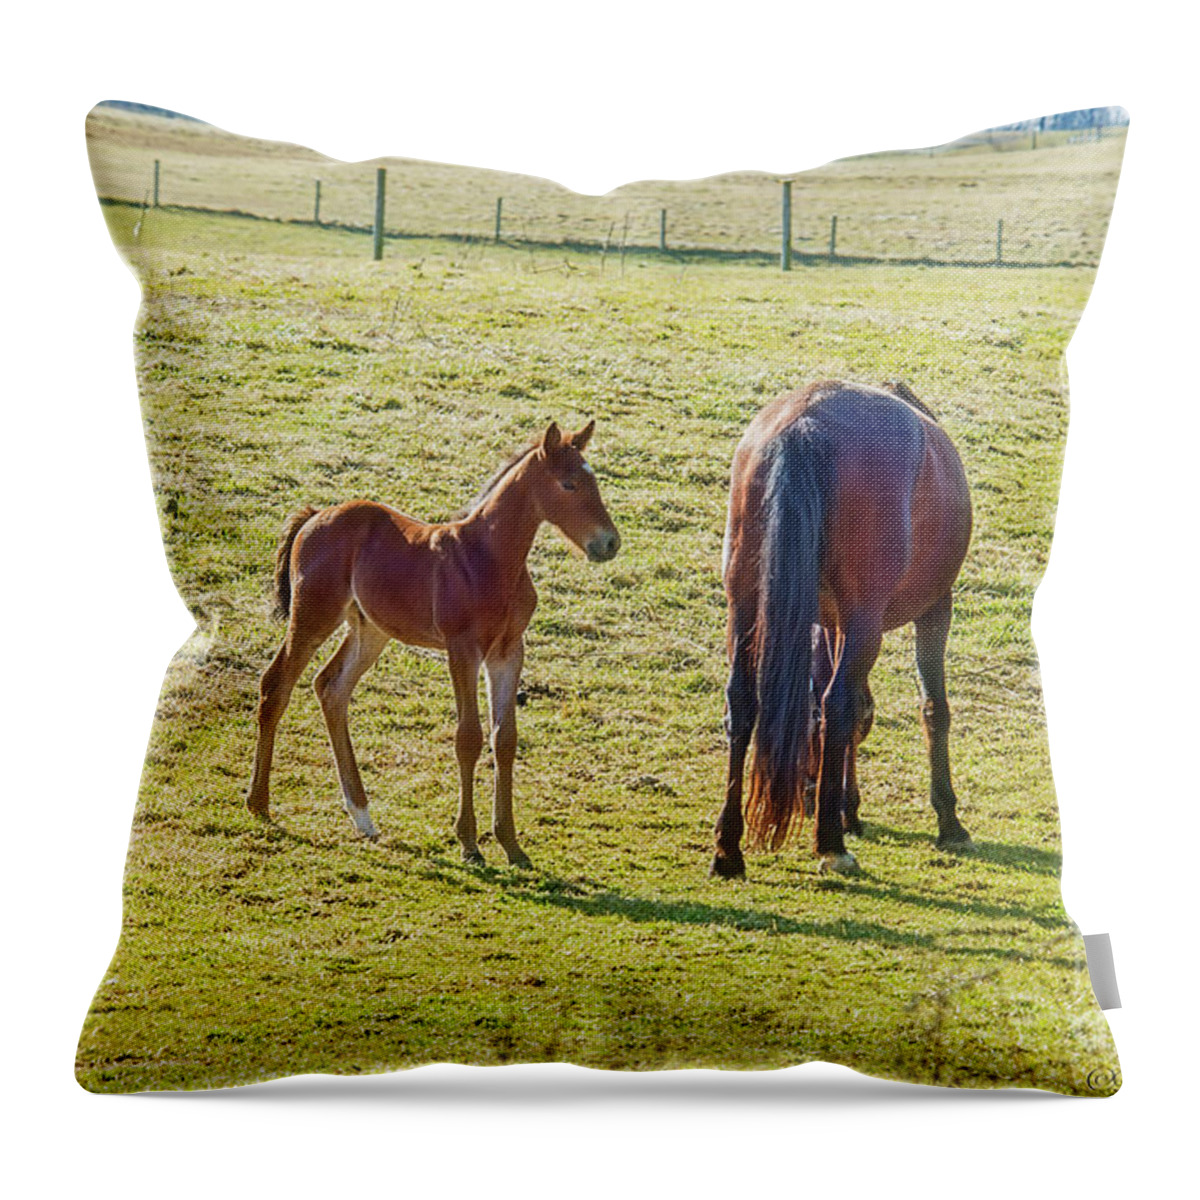 Horse Throw Pillow featuring the photograph Yearling by David Arment